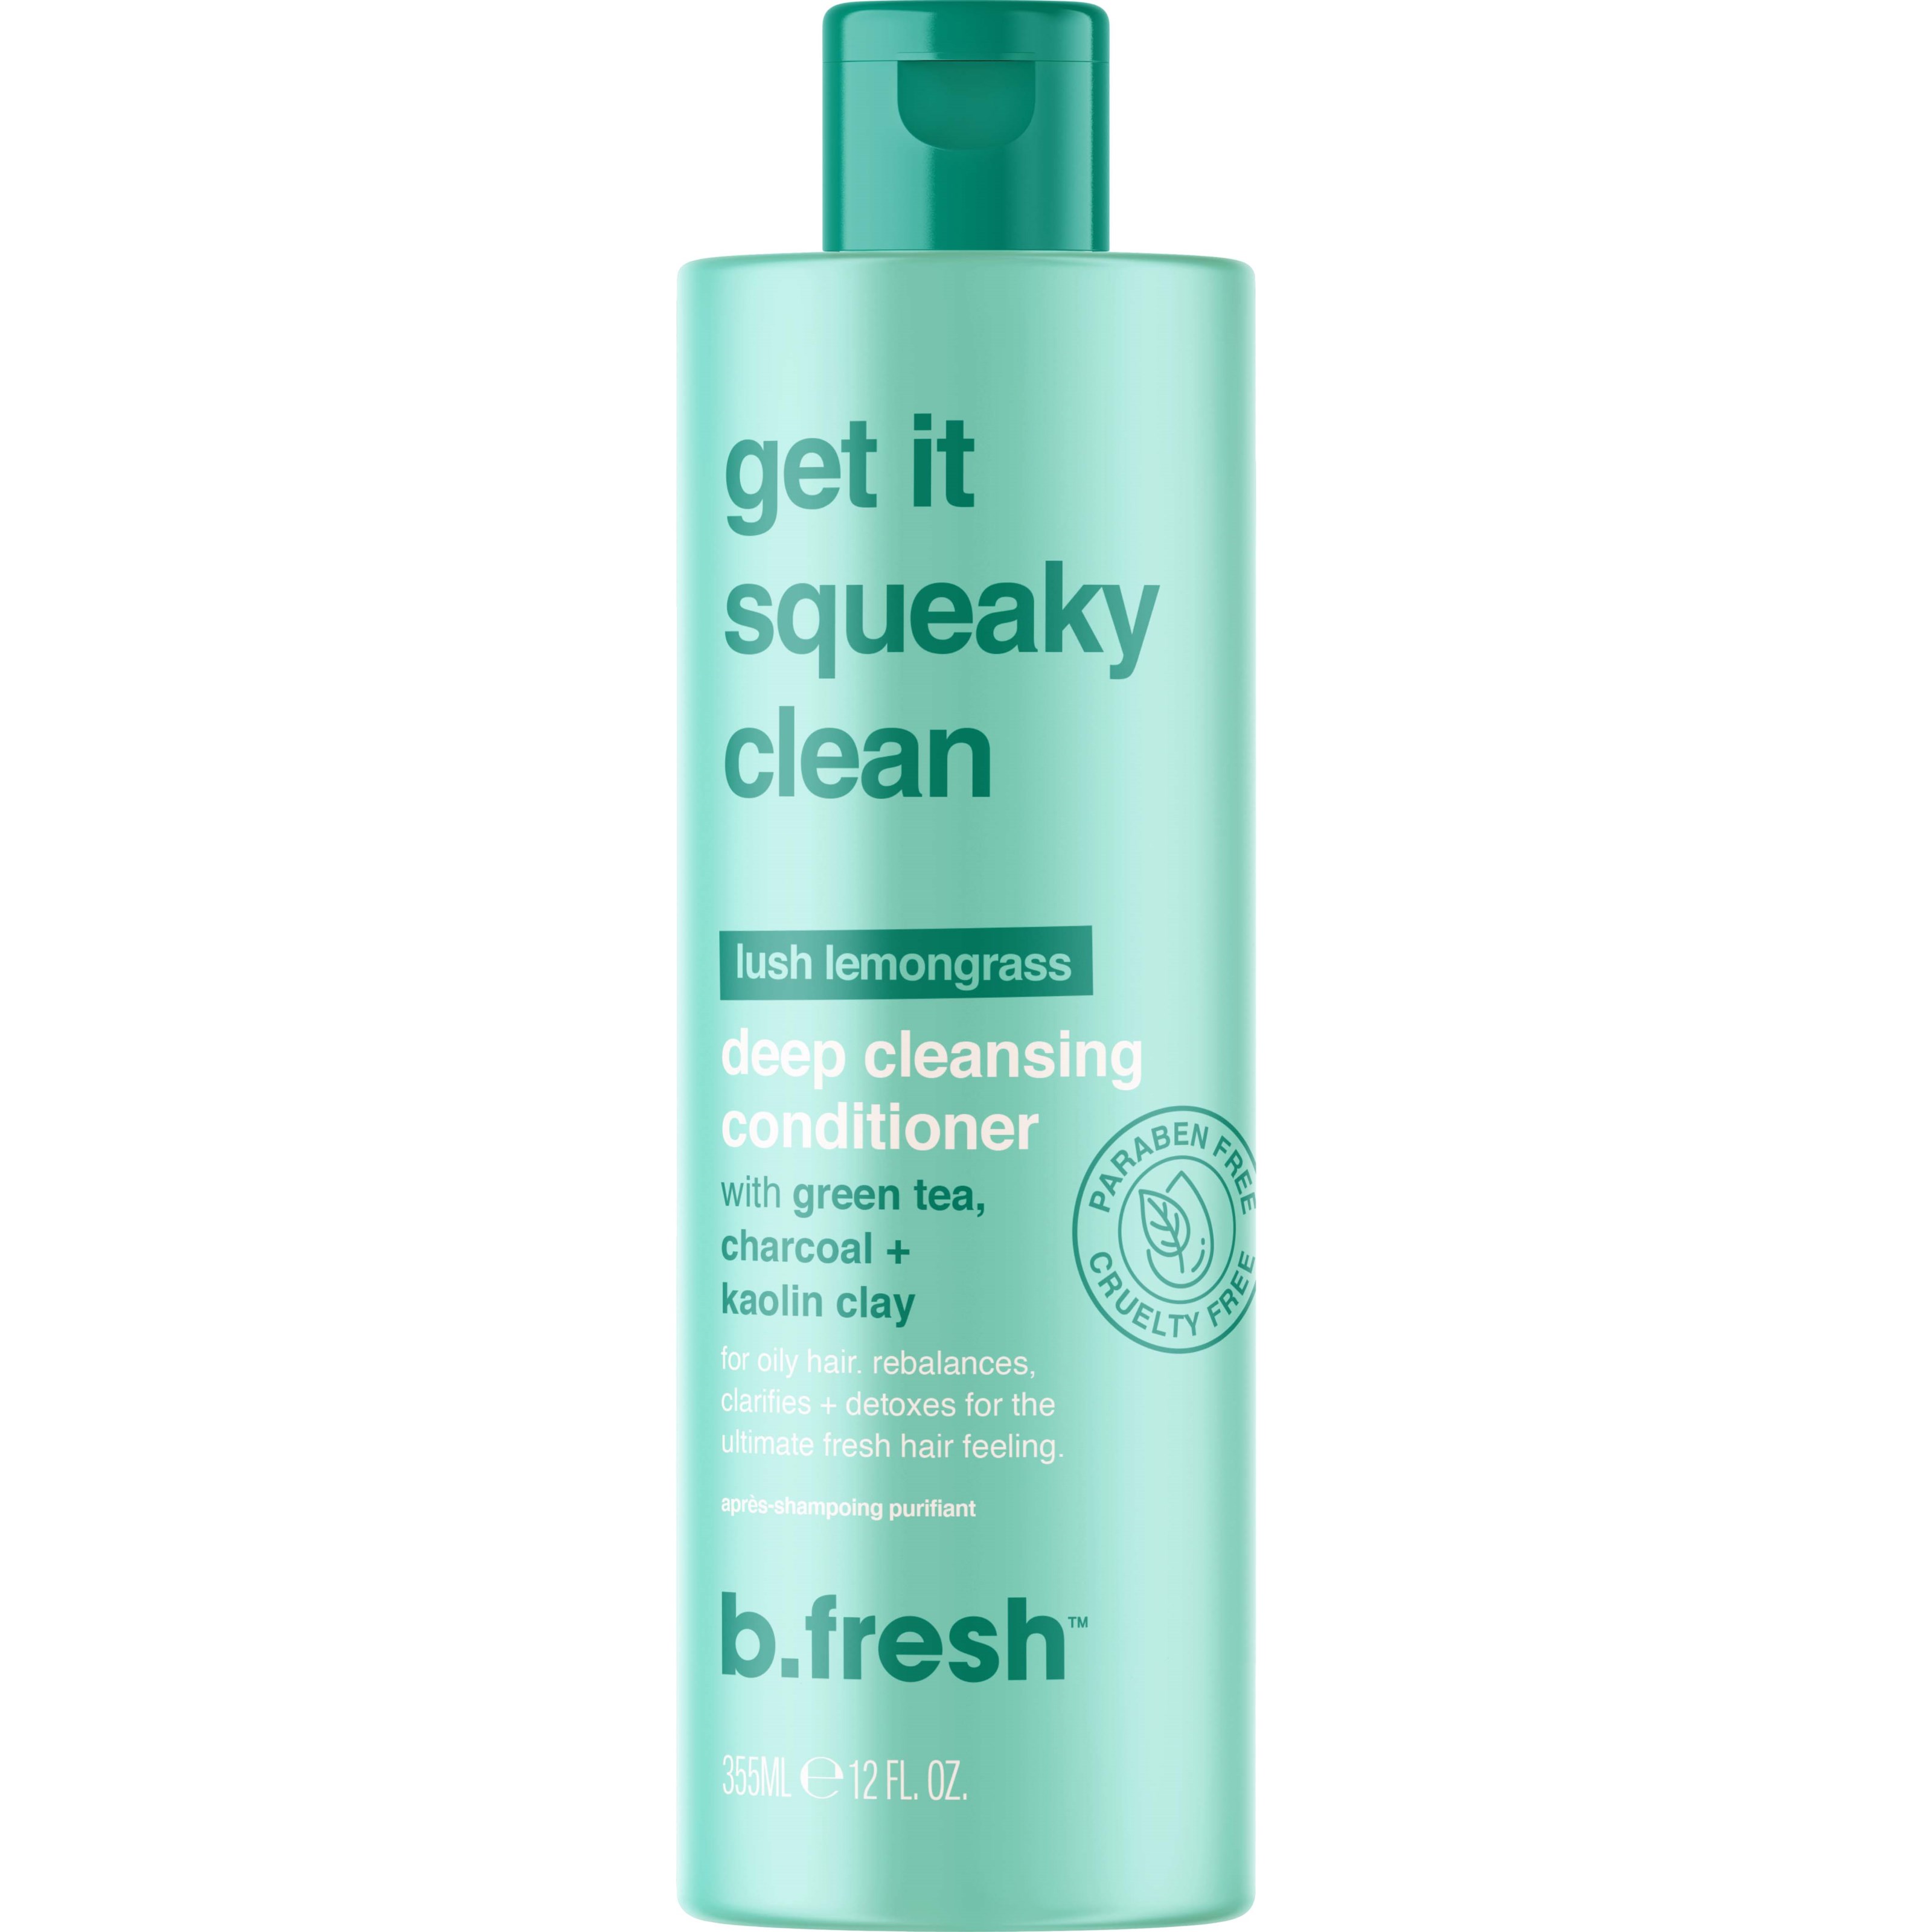 b.fresh Get it squeaky clean deep cleansing conditioner 355 ml